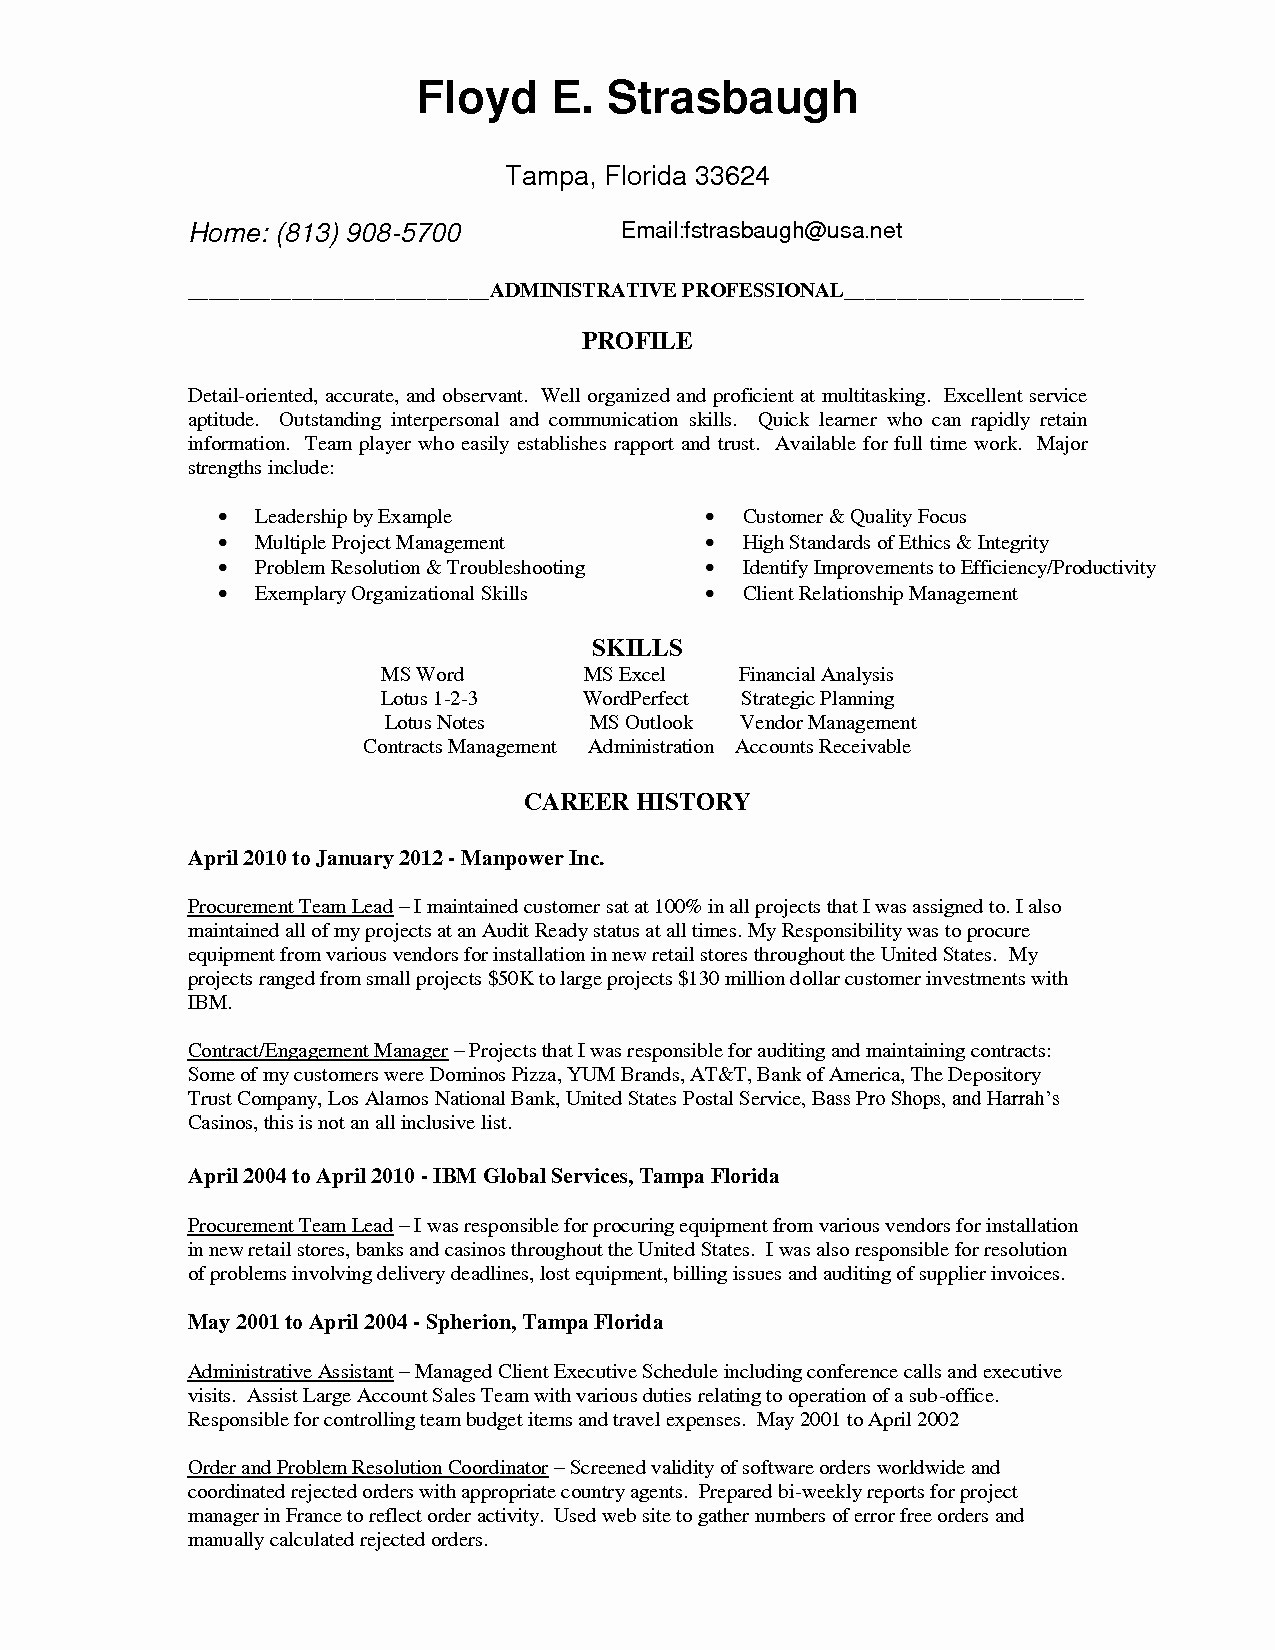 cover letter word template free example-Free Microsoft Word Resume Templates Awesome Professional Job Resume Template Od Specialist Cover Letter Lead Staggering Business Ppt Templates Free 6-n